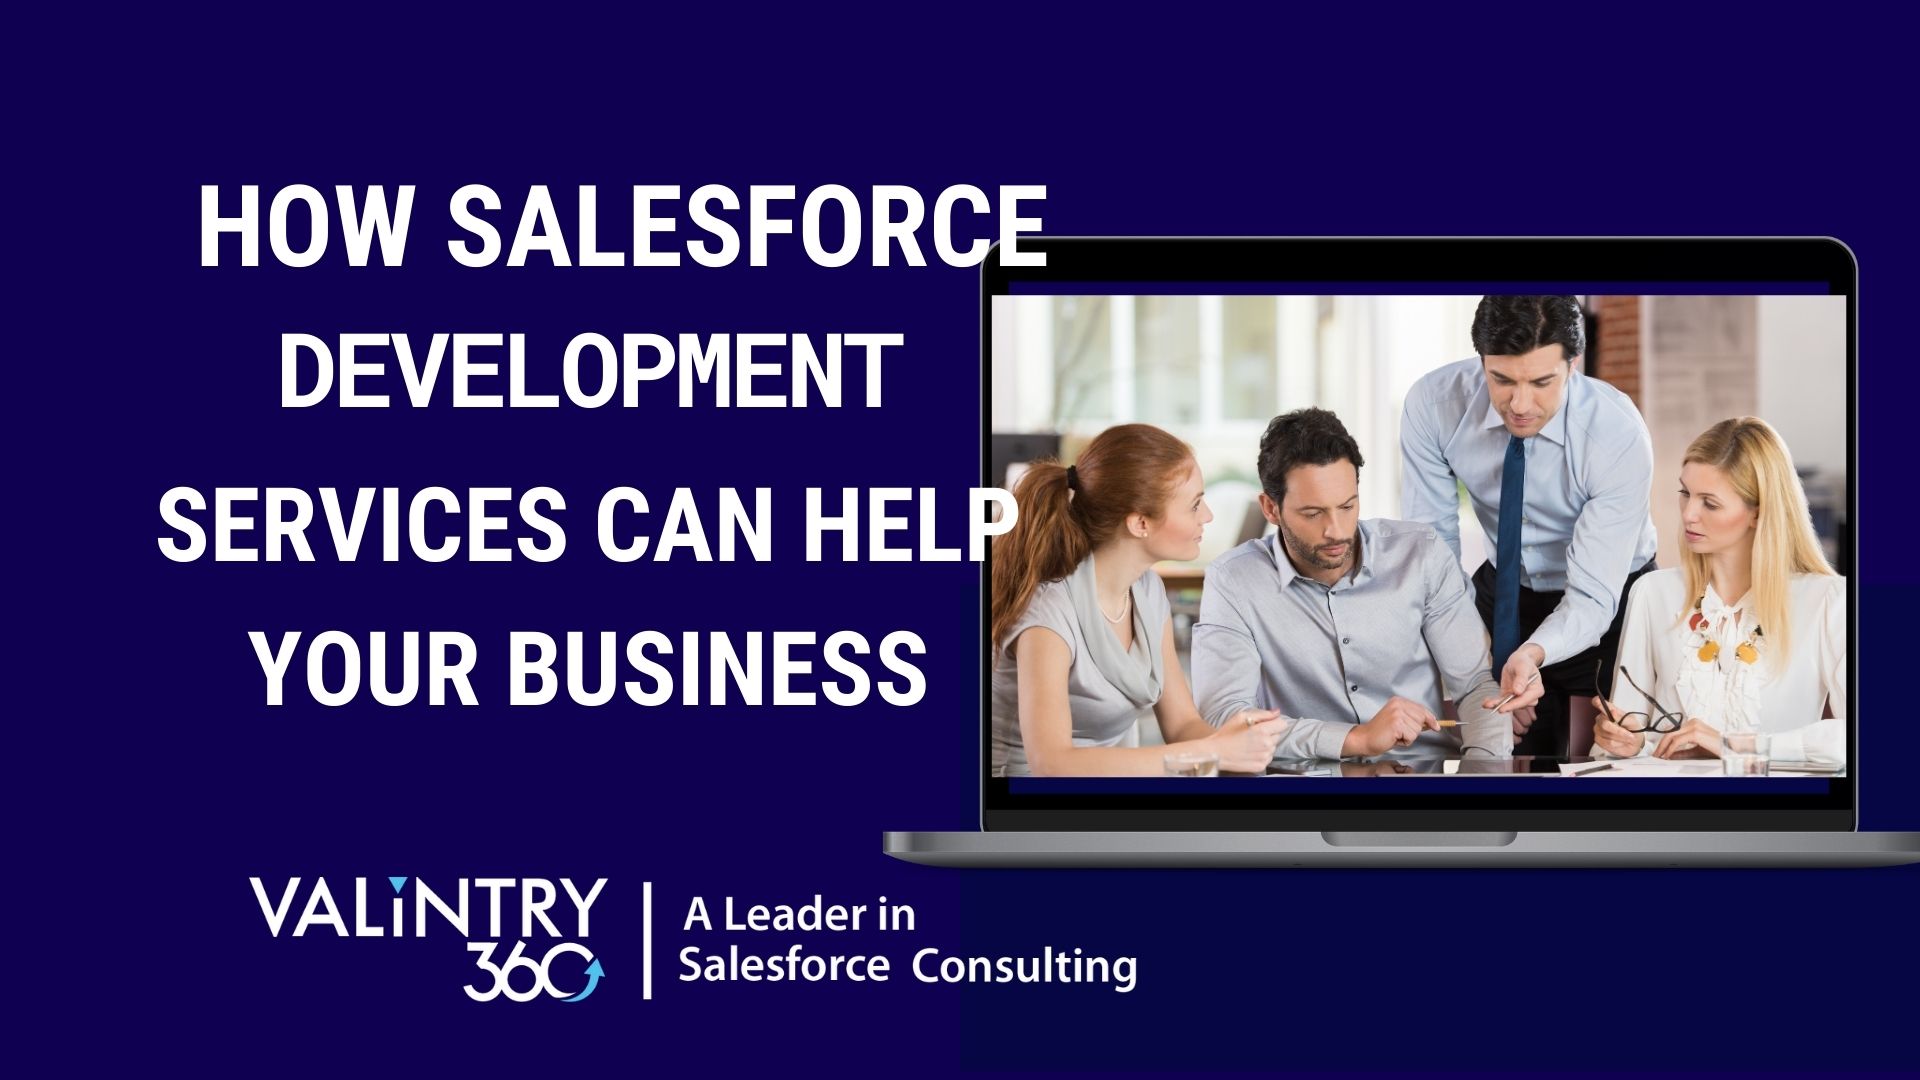 How Salesforce Development Services Can Help Your Business